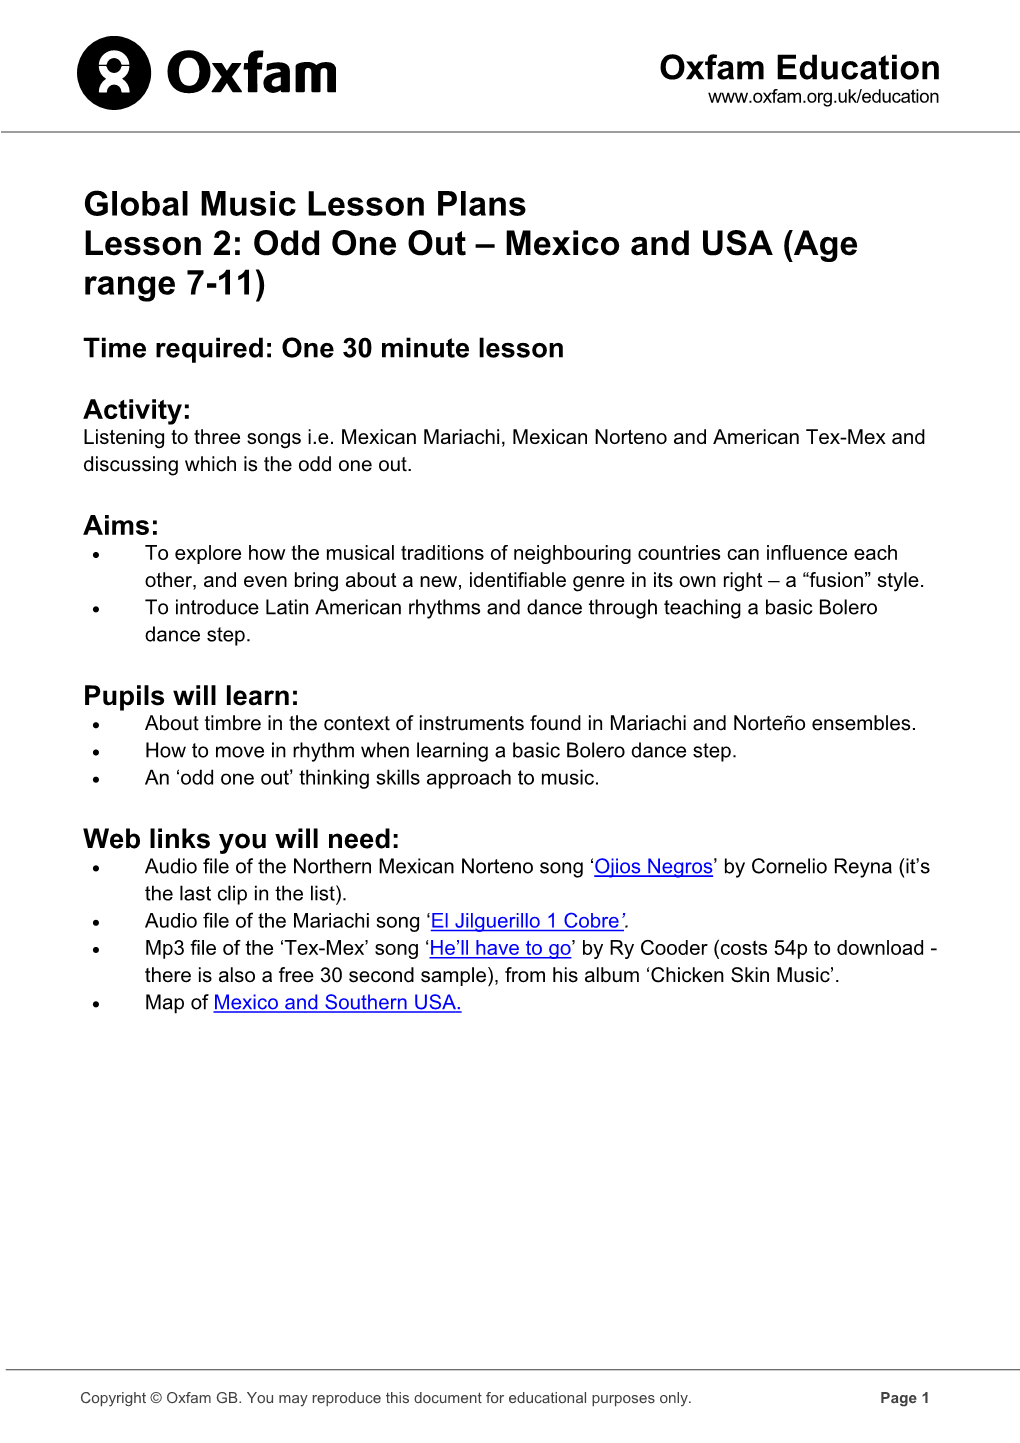 Global Music Lesson Plans Lesson 2: Odd One out – Mexico and USA (Age Range 7-11)